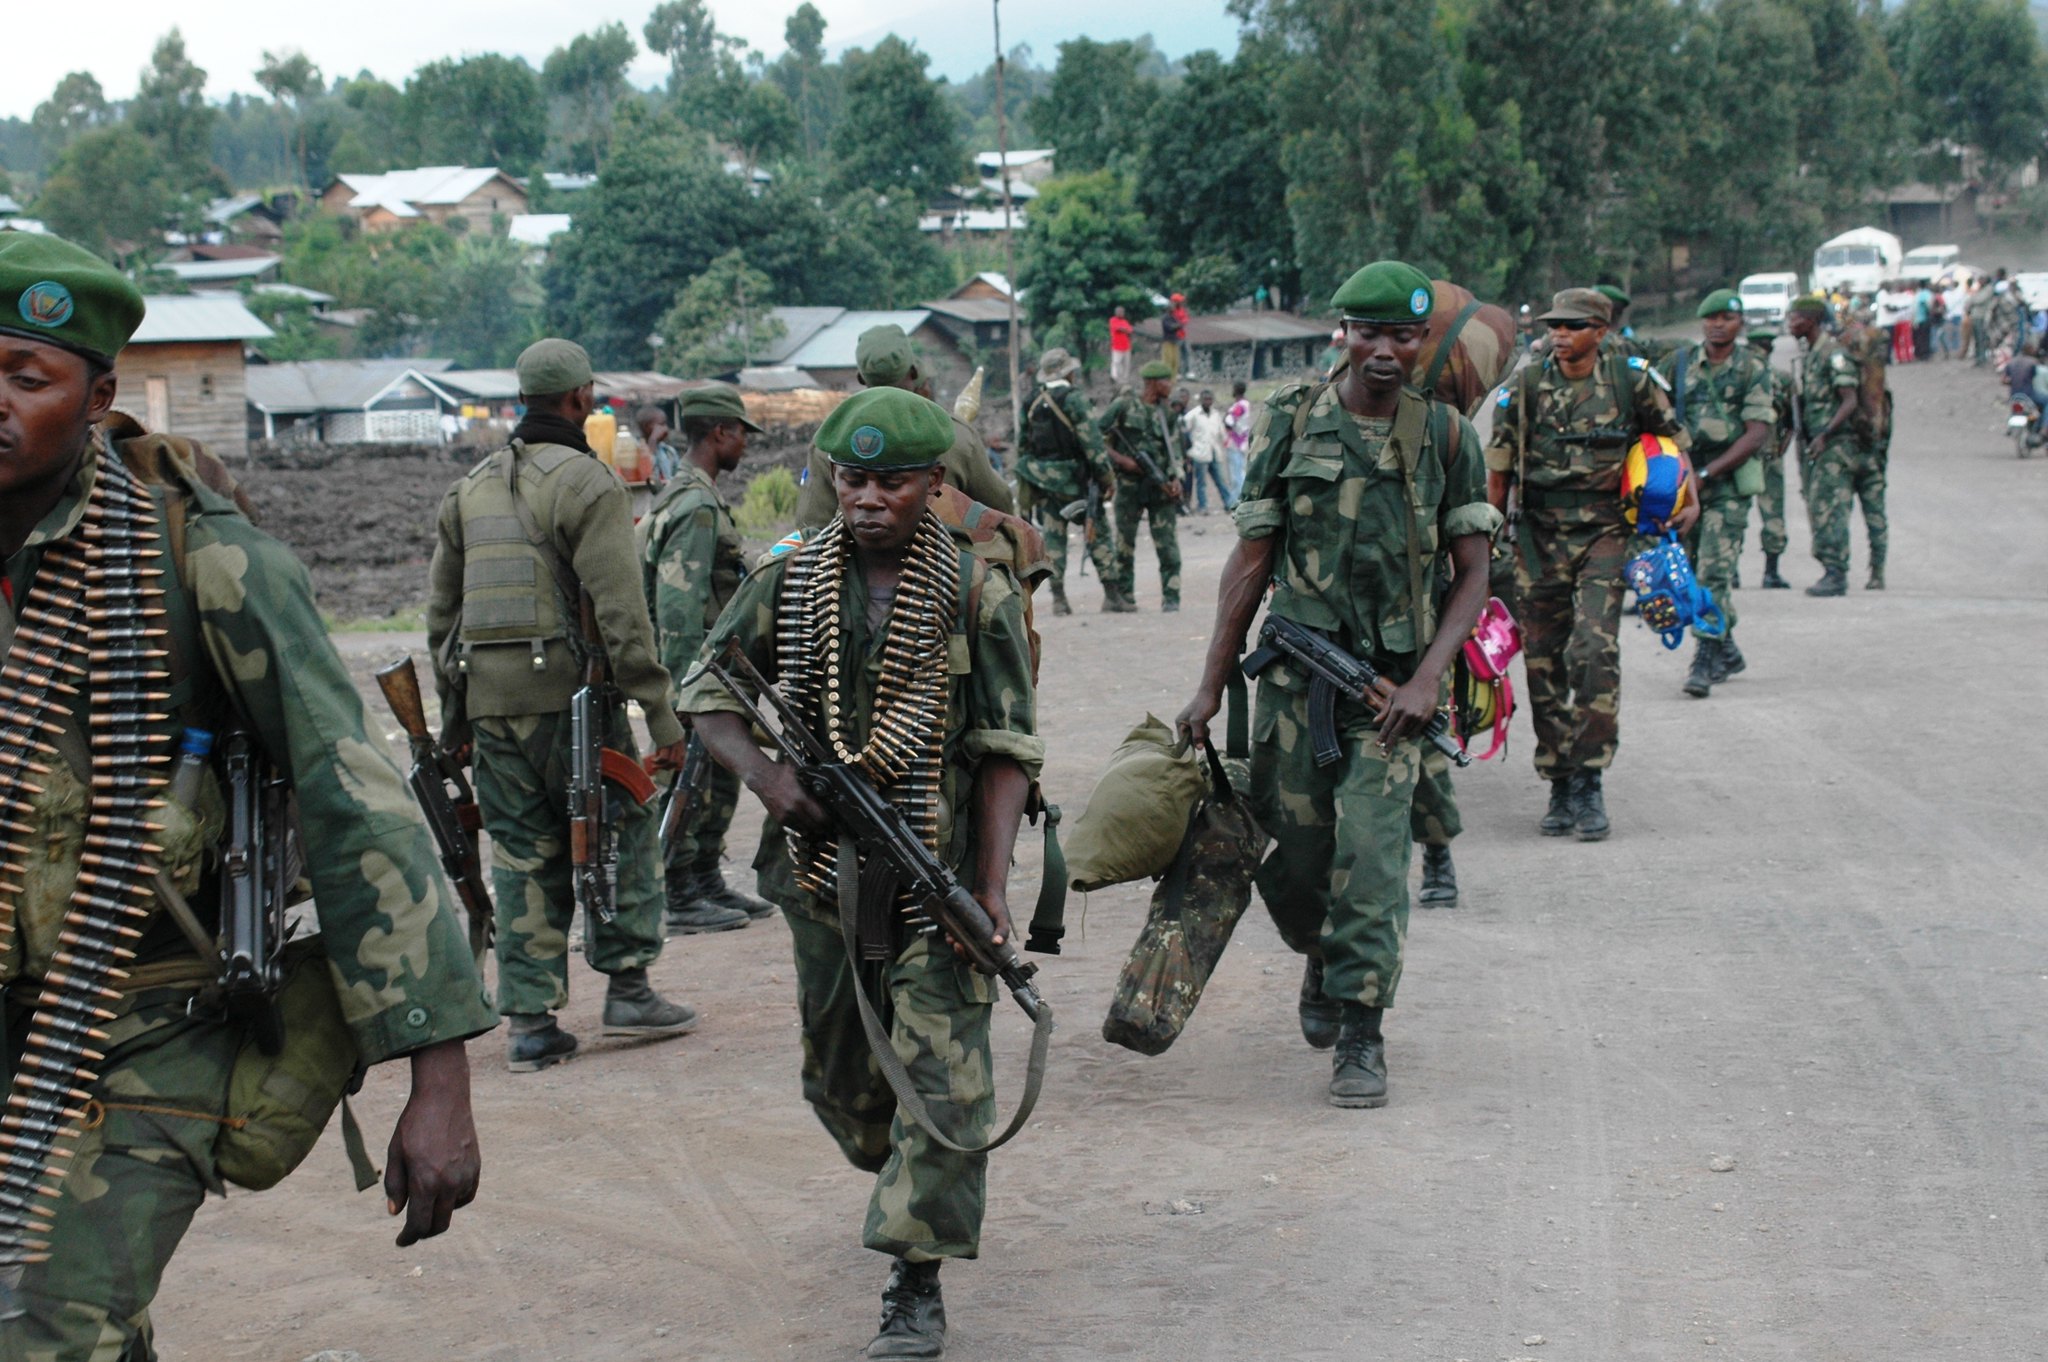 The Congolese National Armed Forces (FARDC) reinforce their positions around Goma following a second day (21 May 2013) of fighting against M23 elements in the town of Mutaho, about 10 km from Goma.